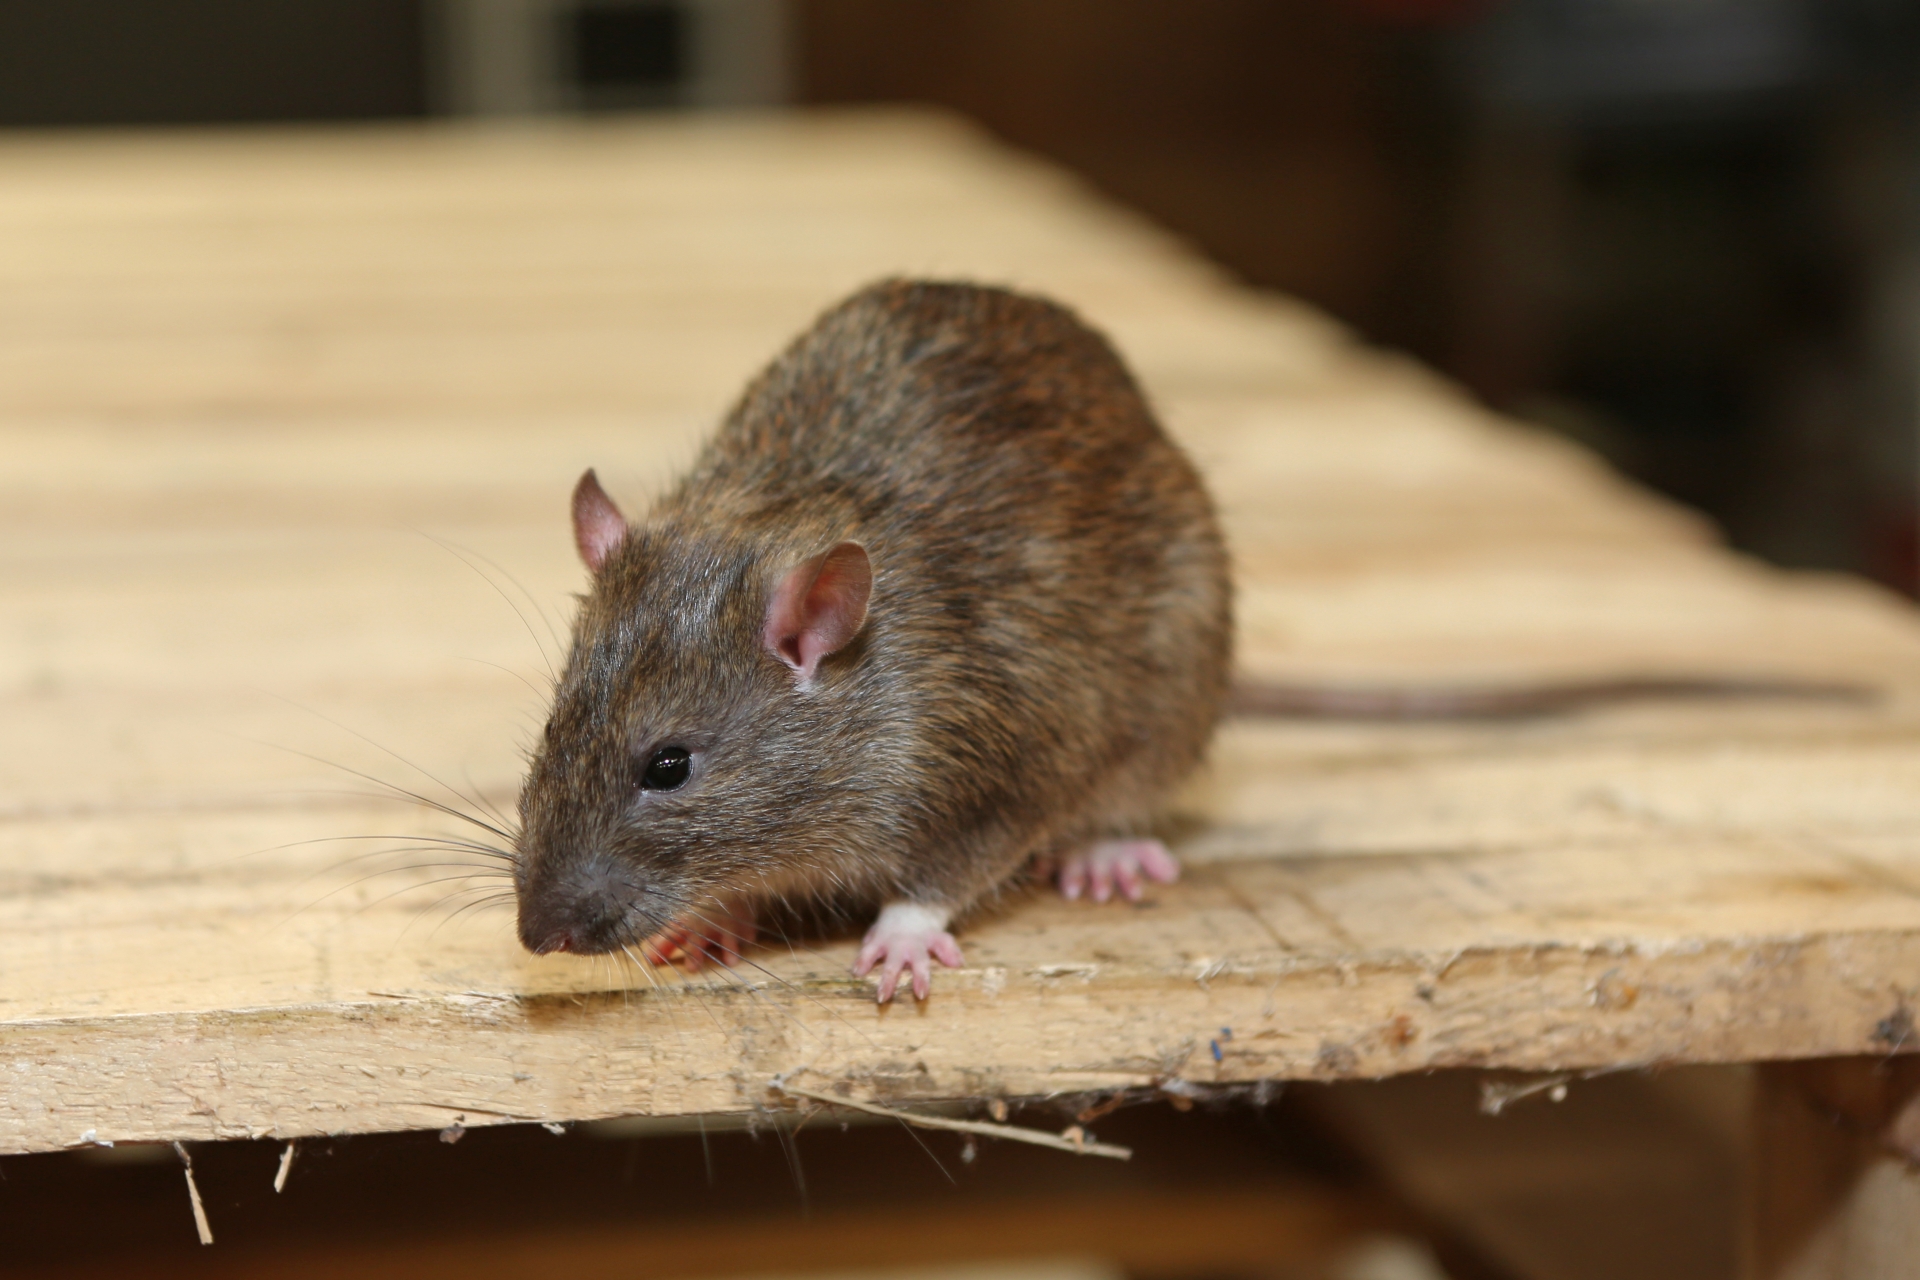 Rat Infestation, Pest Control in West Ealing, W13. Call Now 020 8166 9746